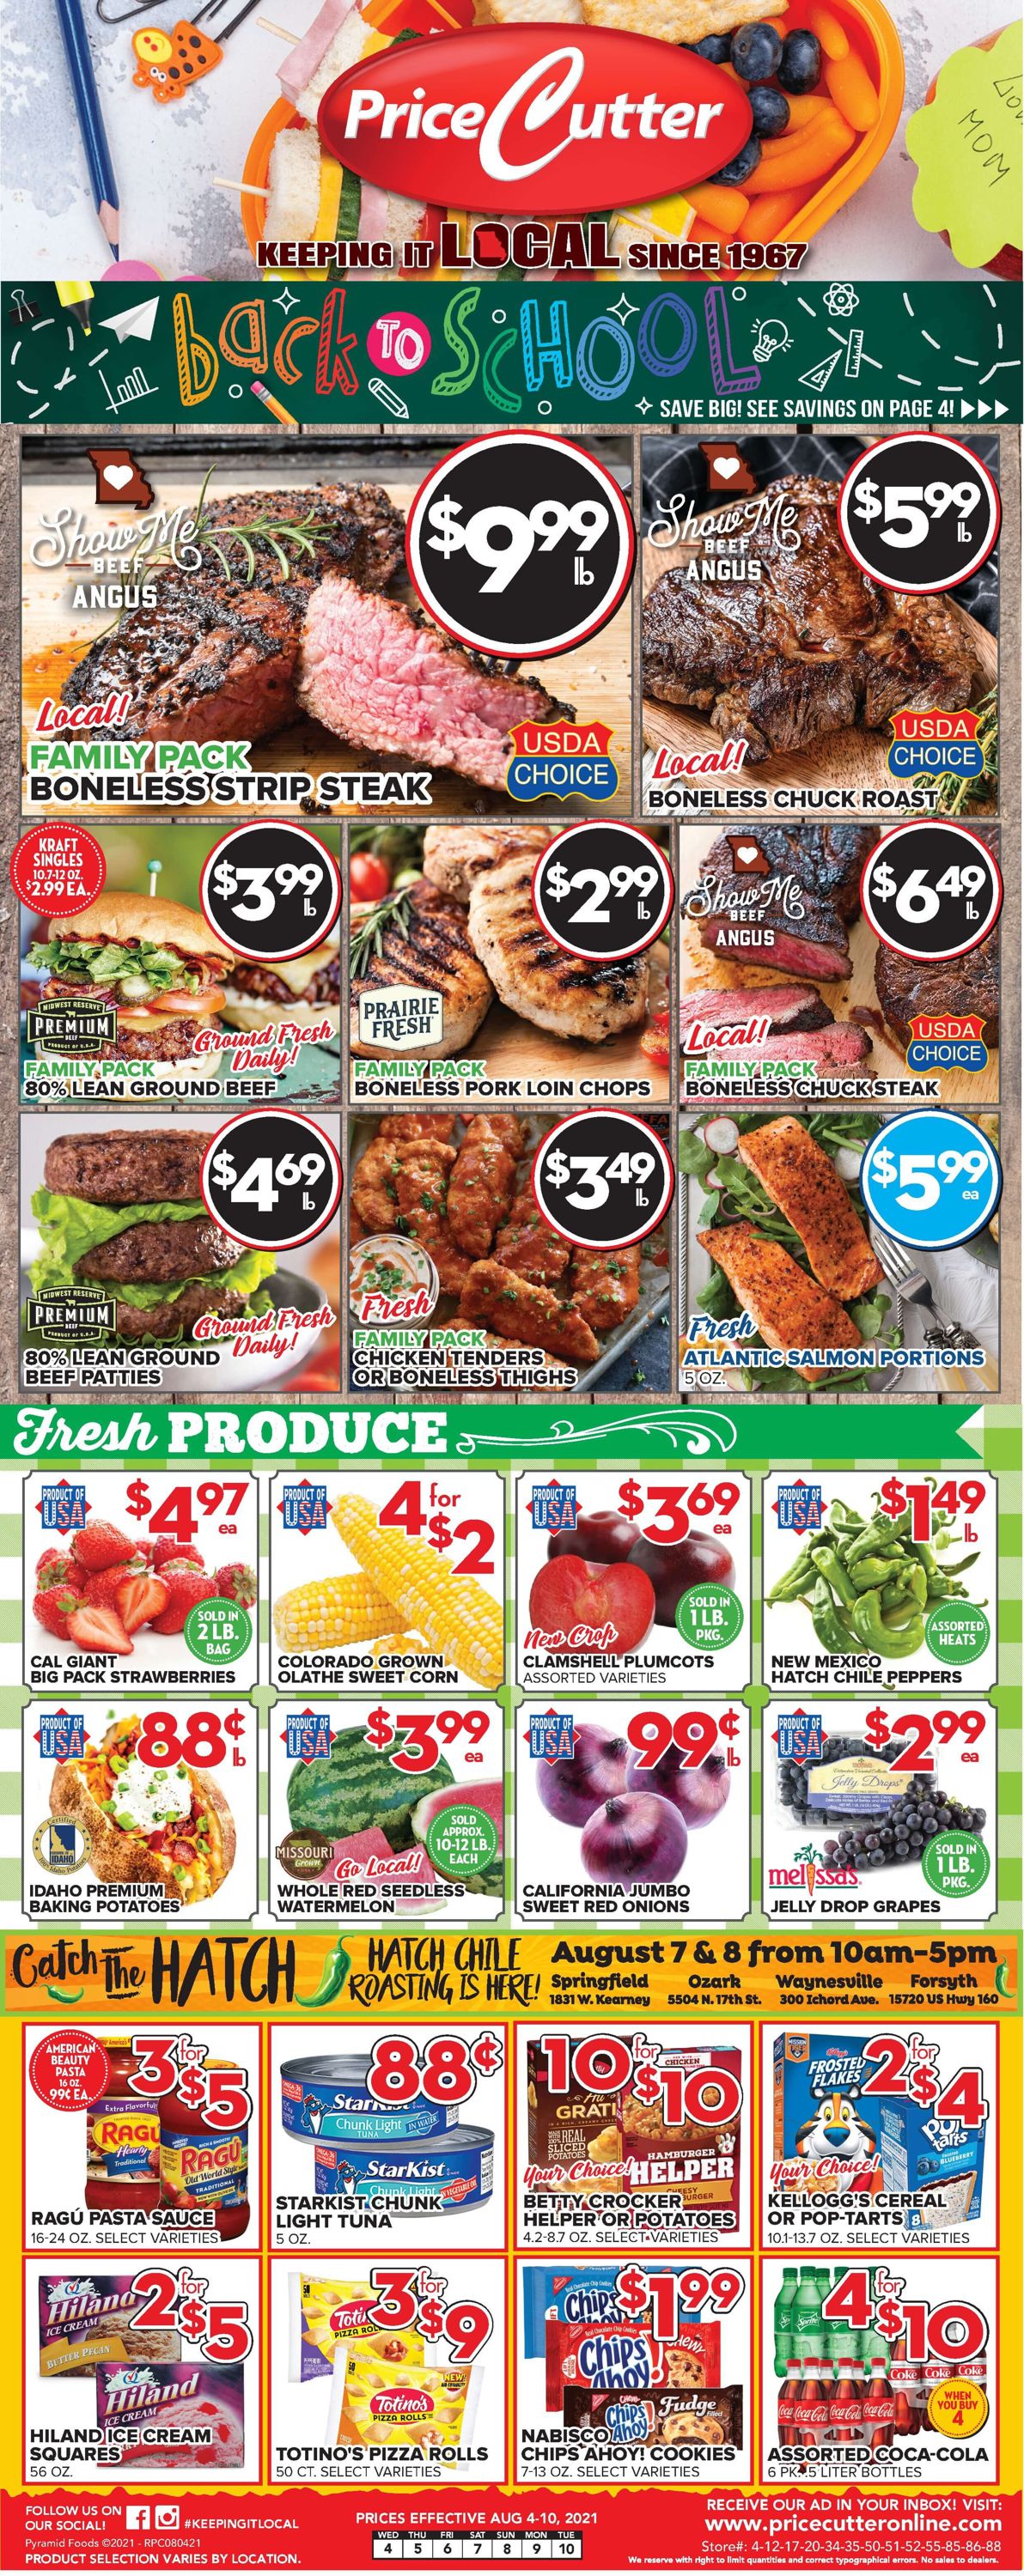 Price Cutter Weekly Ad Circular - valid 08/04-08/10/2021